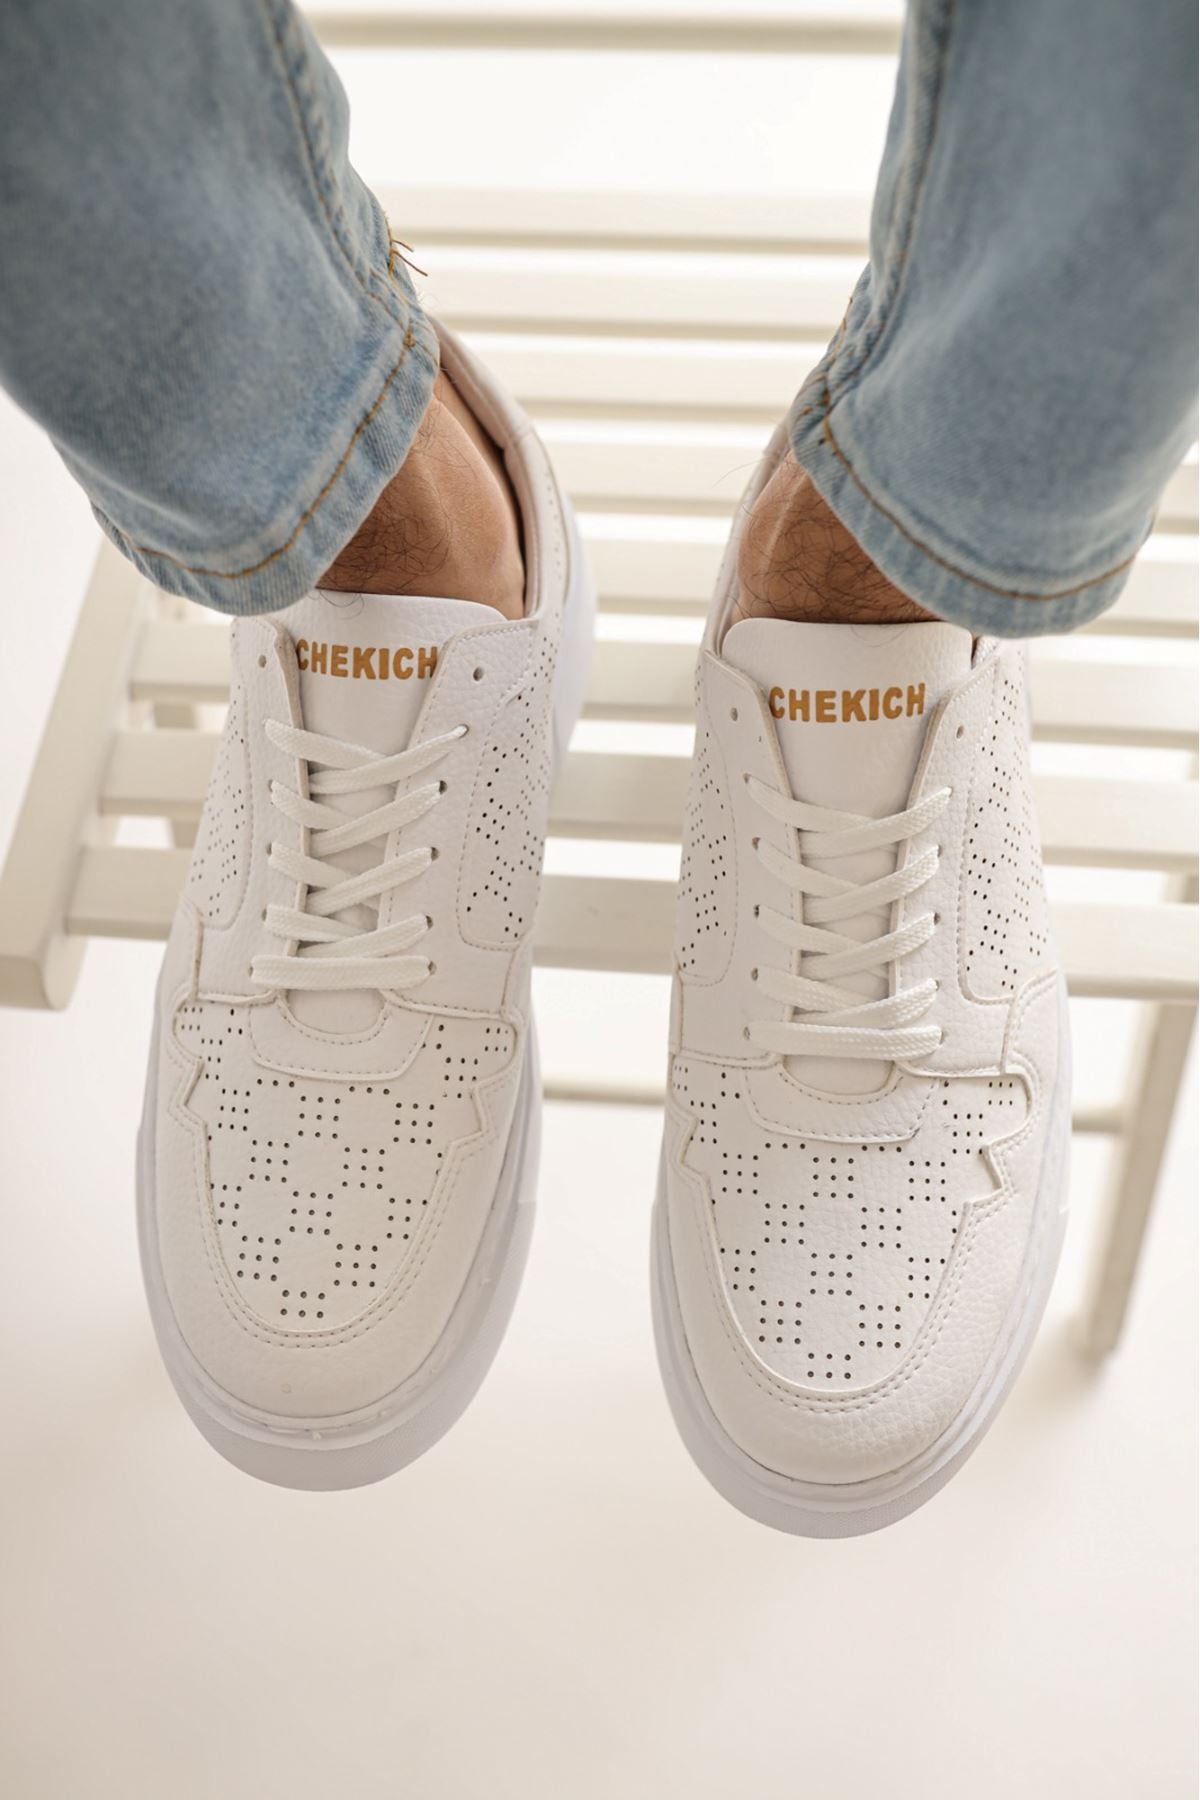 CH 153 İpekyol BT WHITE Men's shoes sneakers - STREETMODE™